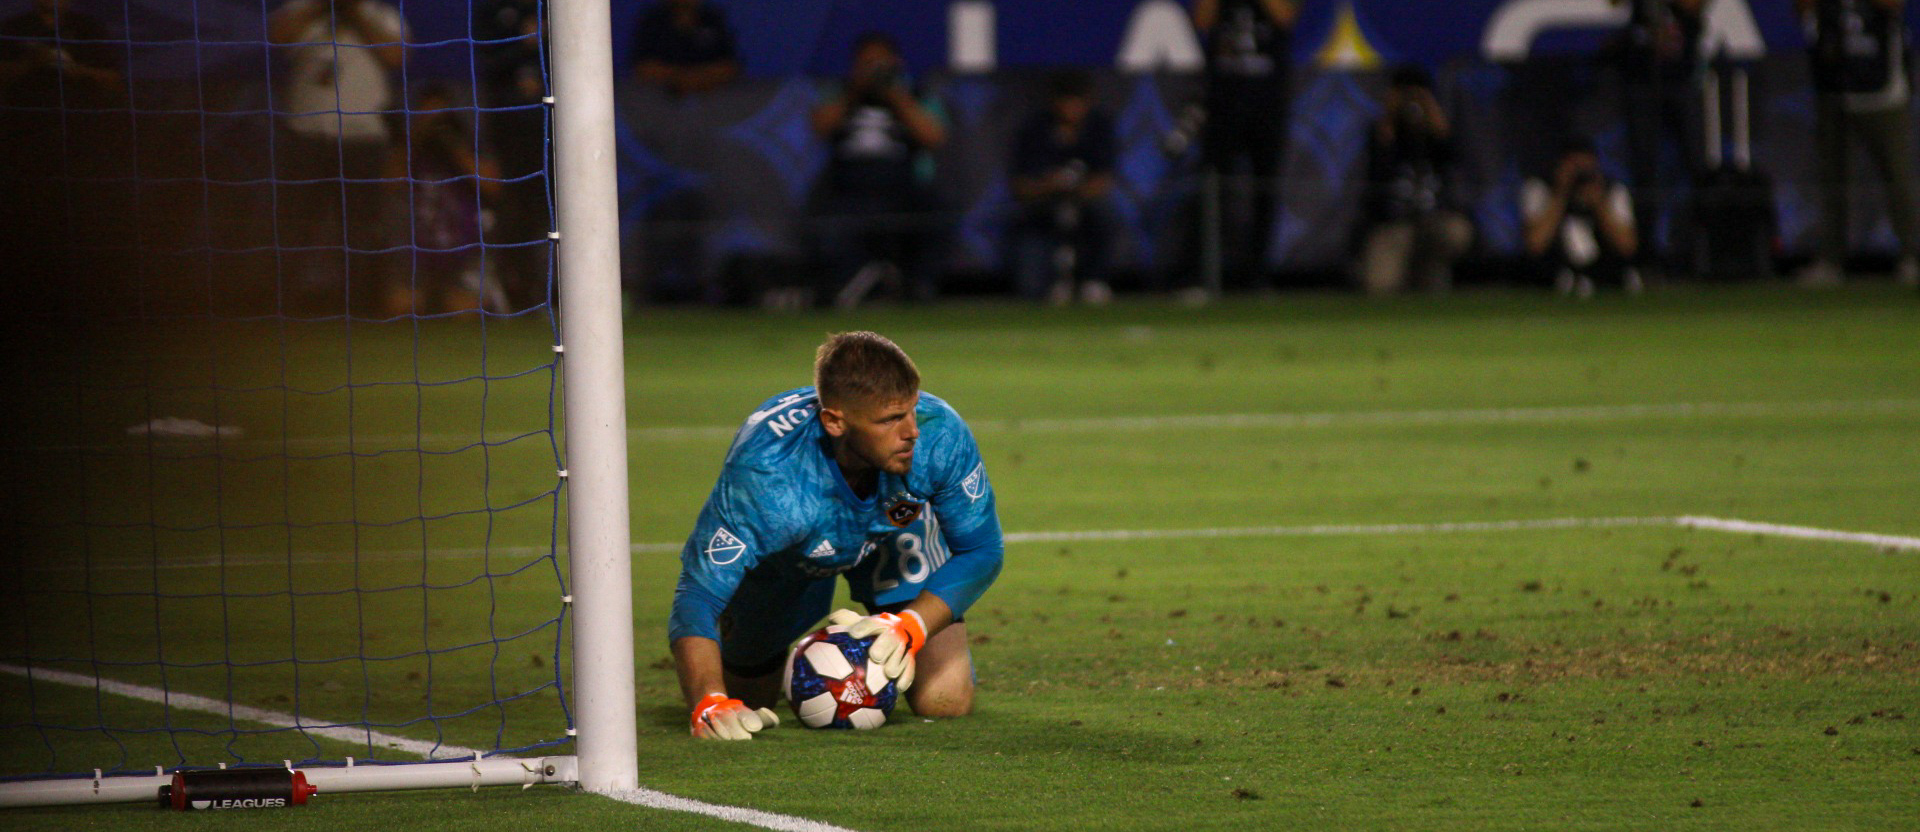 Matt Lampson makes a save for the LA Galaxy in a game on July 23, 2019 - Photo by Brittany Campbell